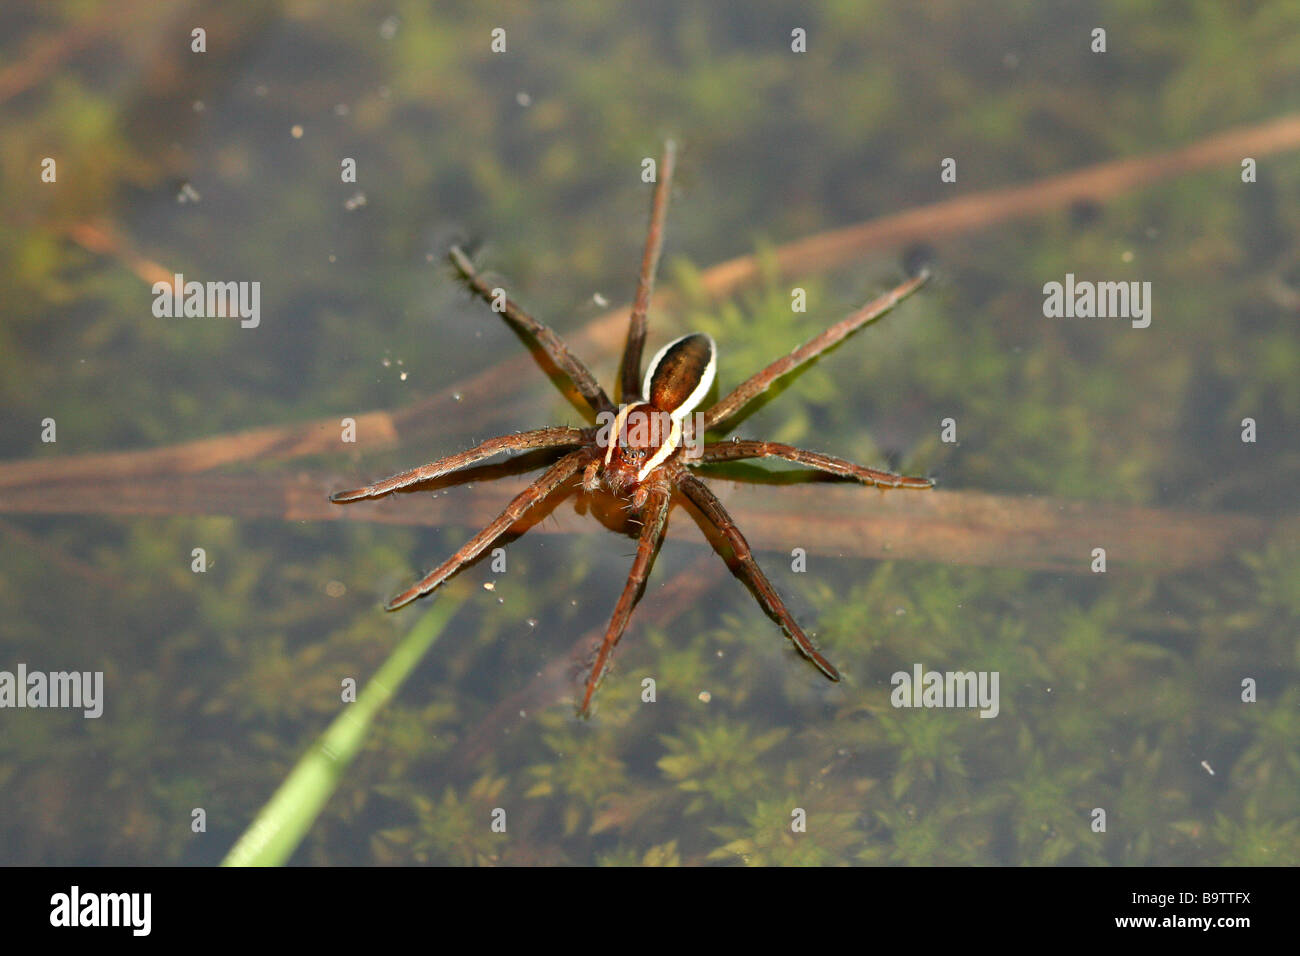 A Raft Spider Dolomedes fimbriatus is a water spider Stock Photo